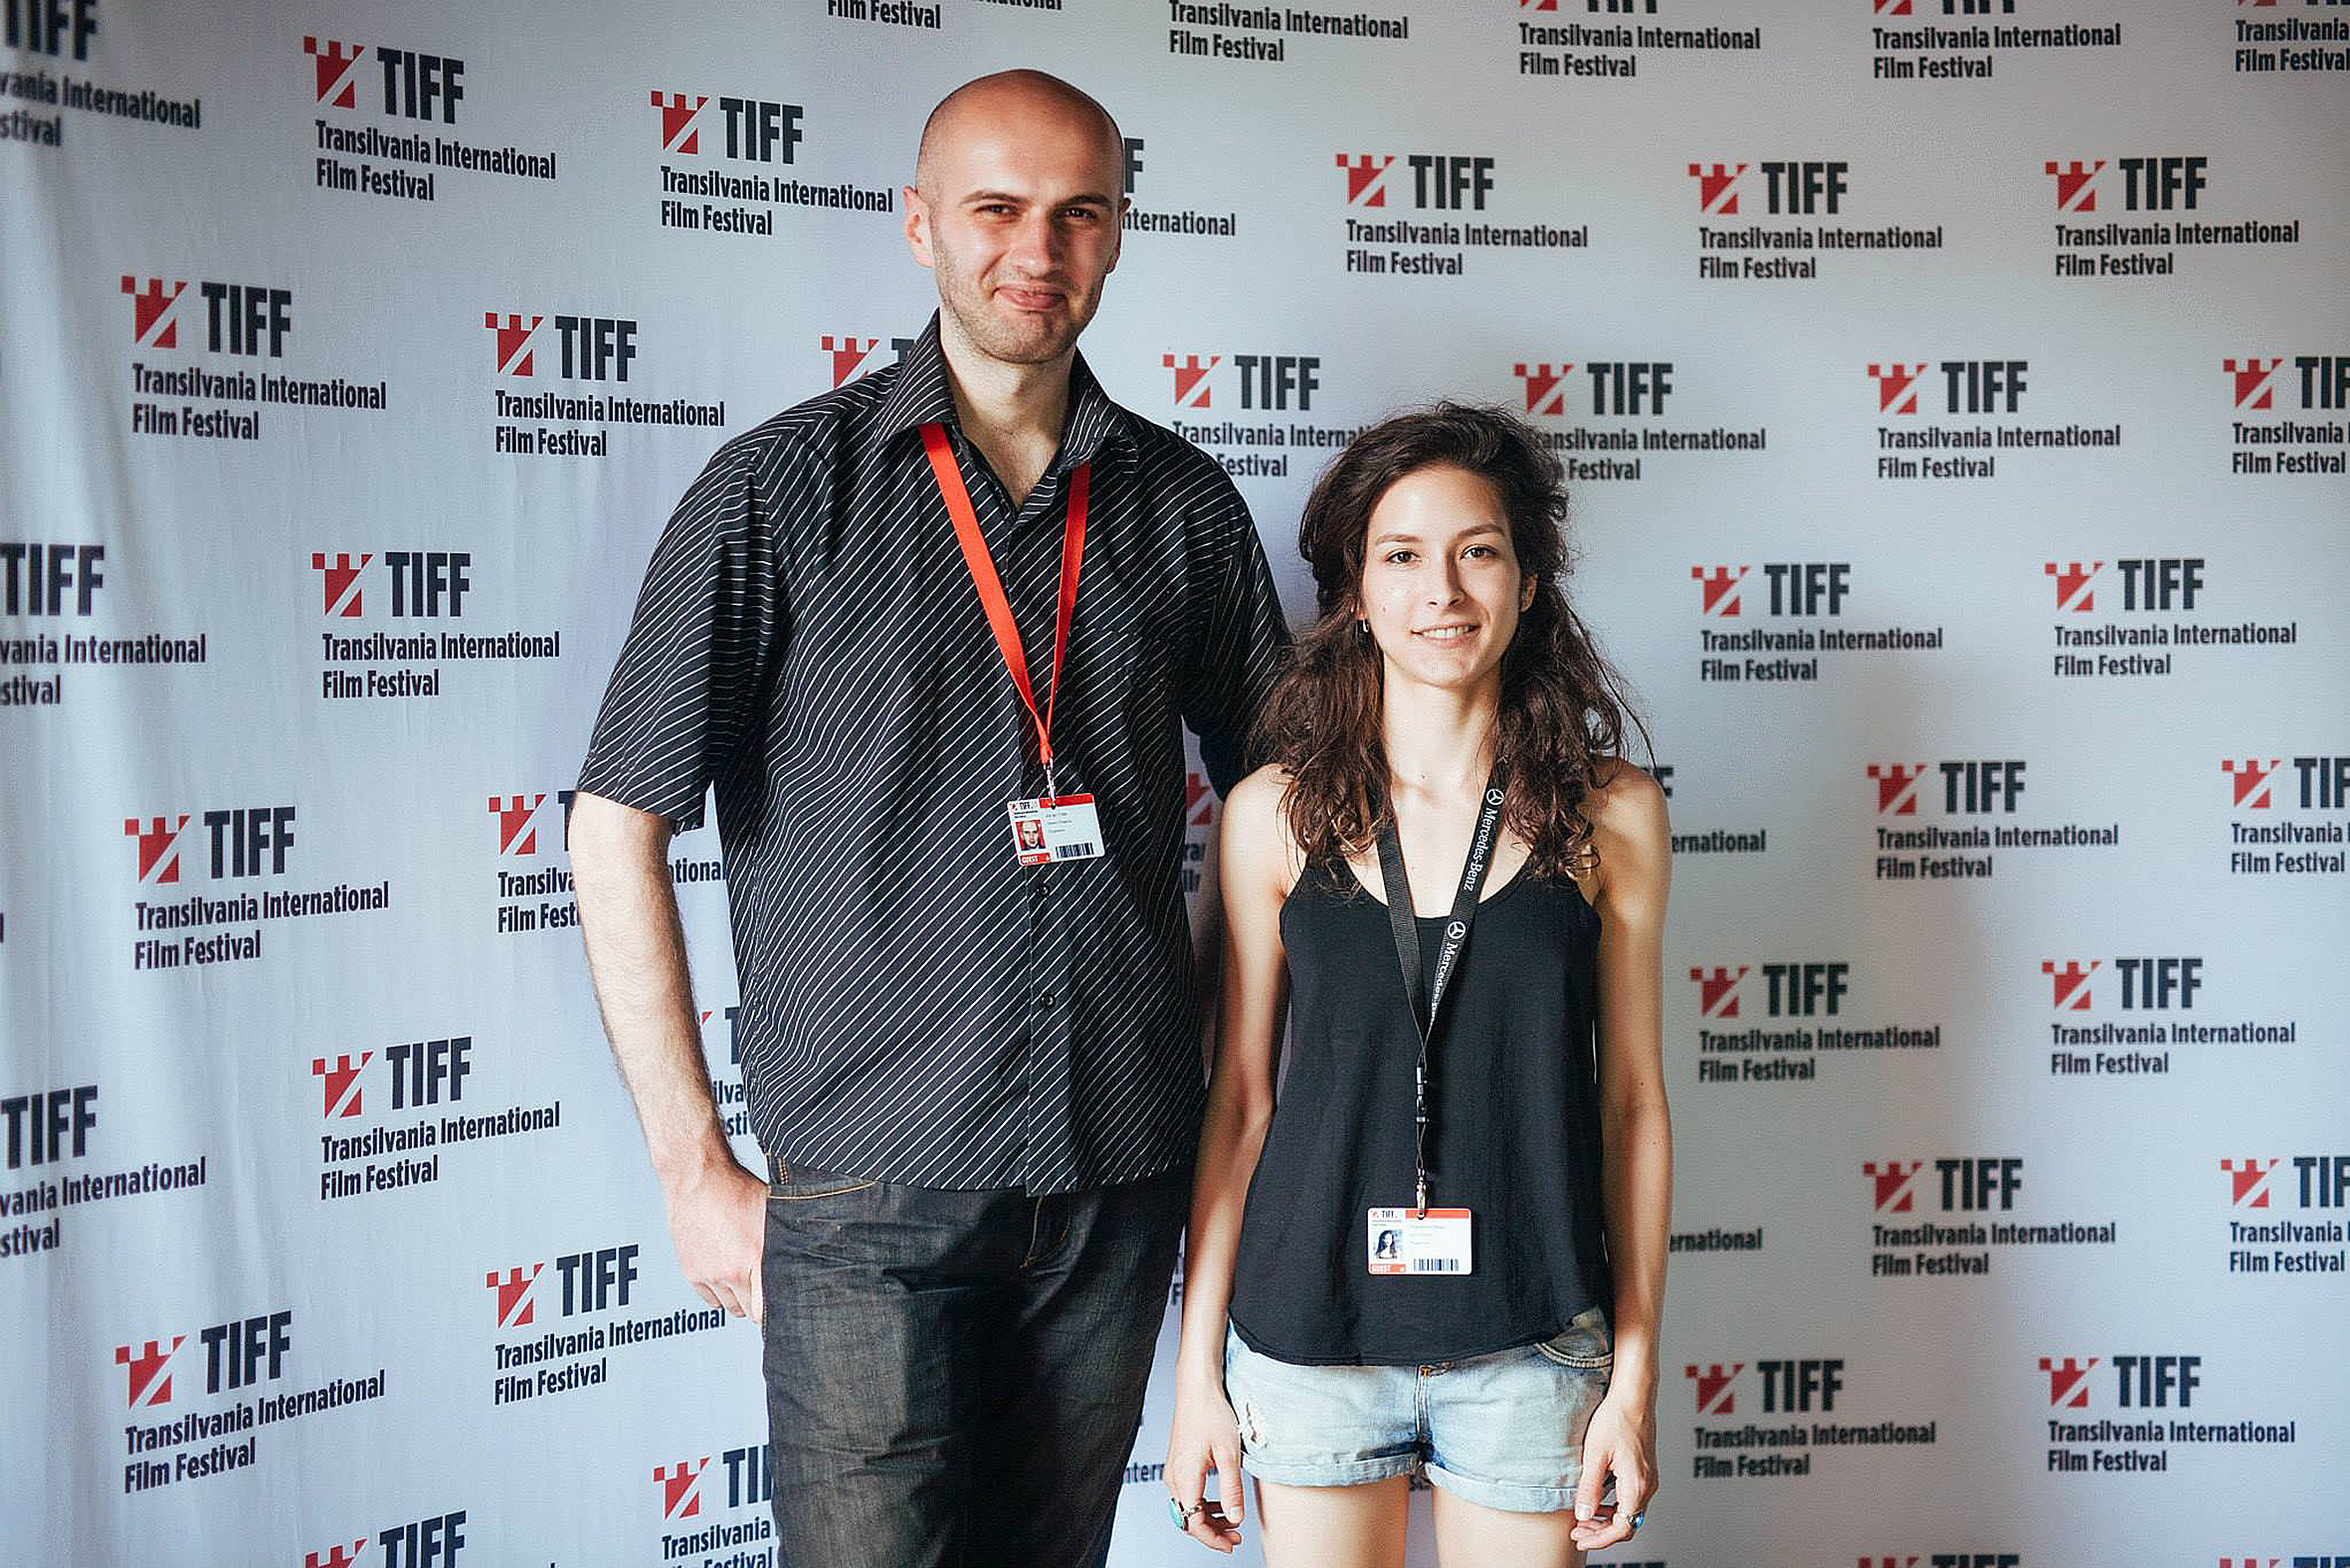 Adrian Tofei and Alexandra Stroe at the Romanian premiere of Be My Cat: A Film for Anne at 2015 TIFF - Transilvania International Film Festival